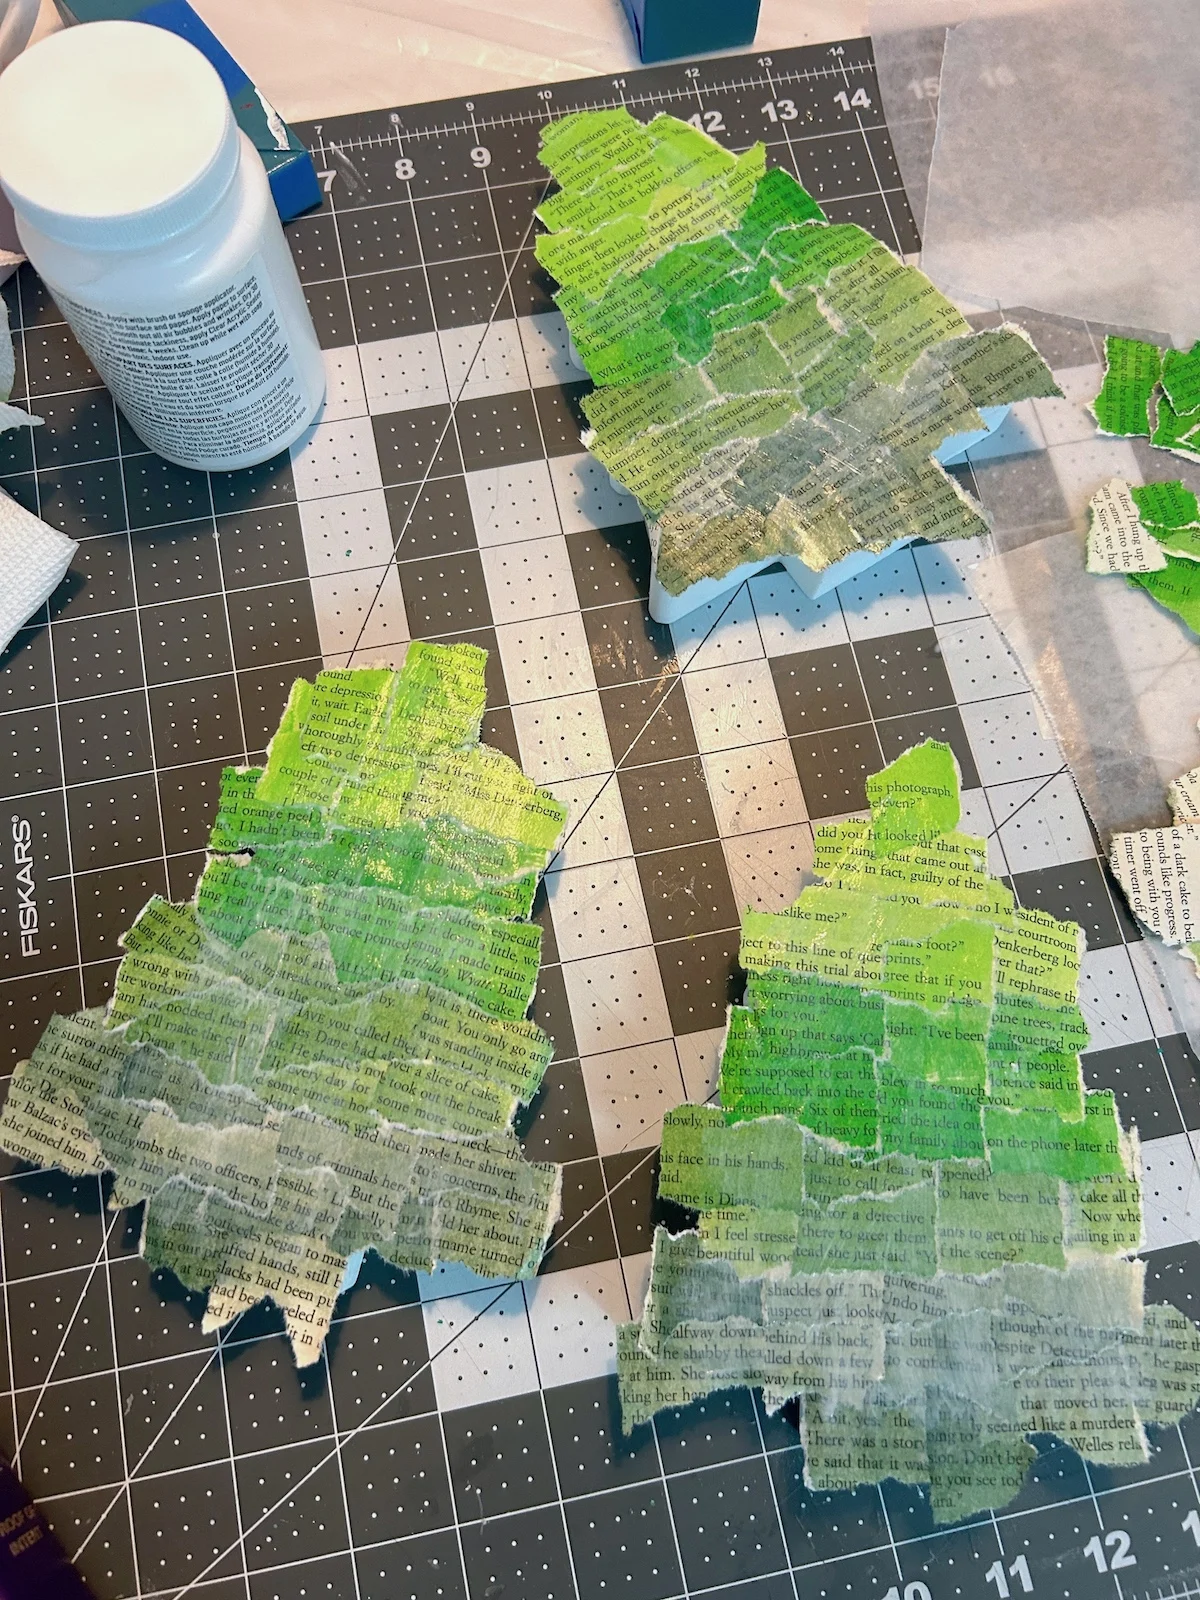 wood trees covered in book pages and a second coat of Mod Podge